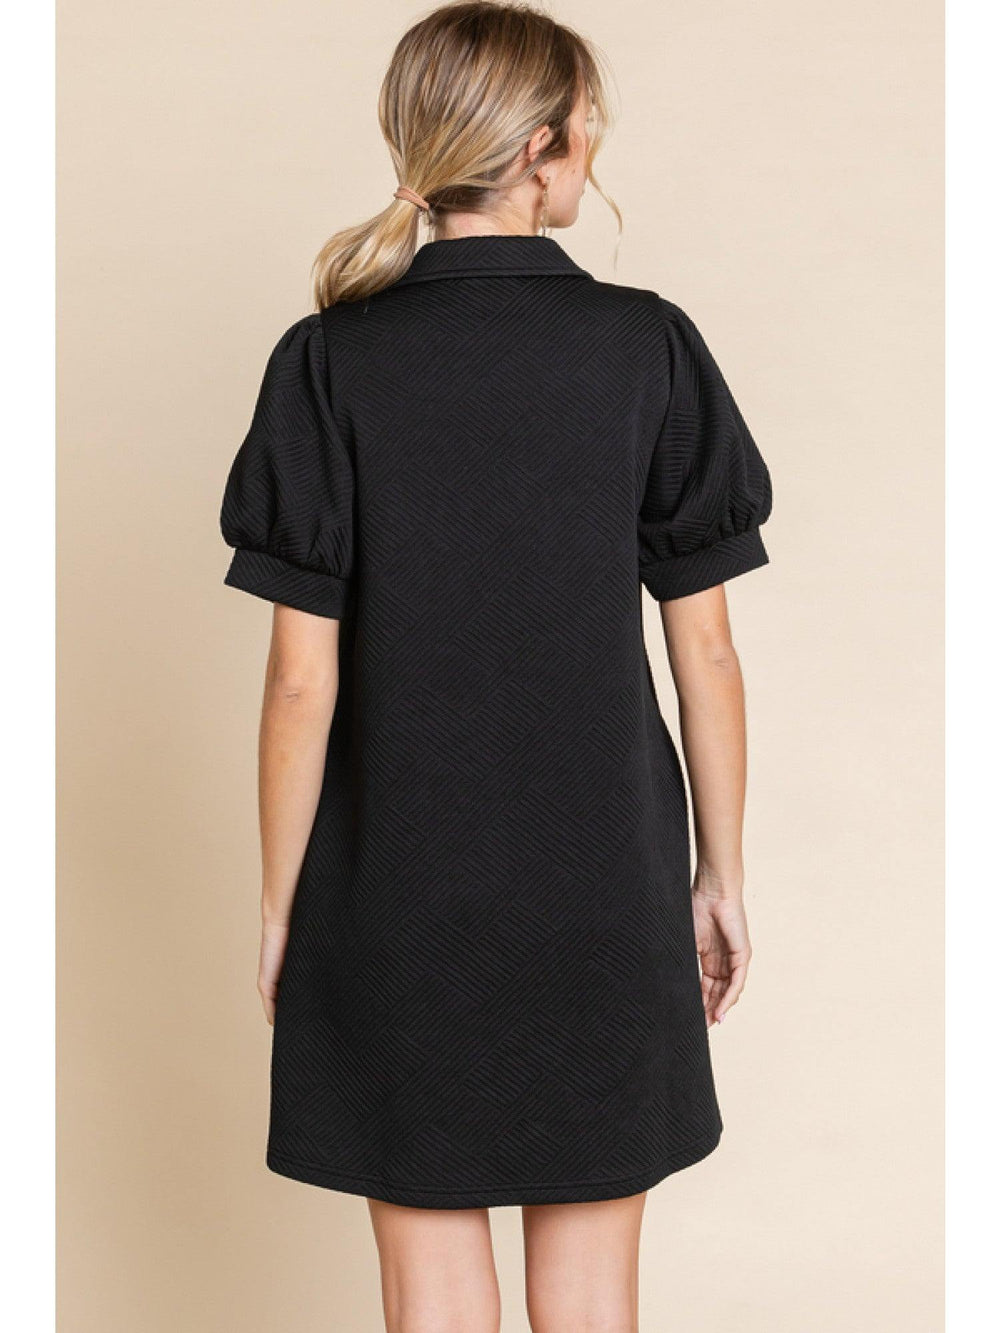 Textured dress with open collared neck, side pockets, and short peasant sleeves, and band cuffs.